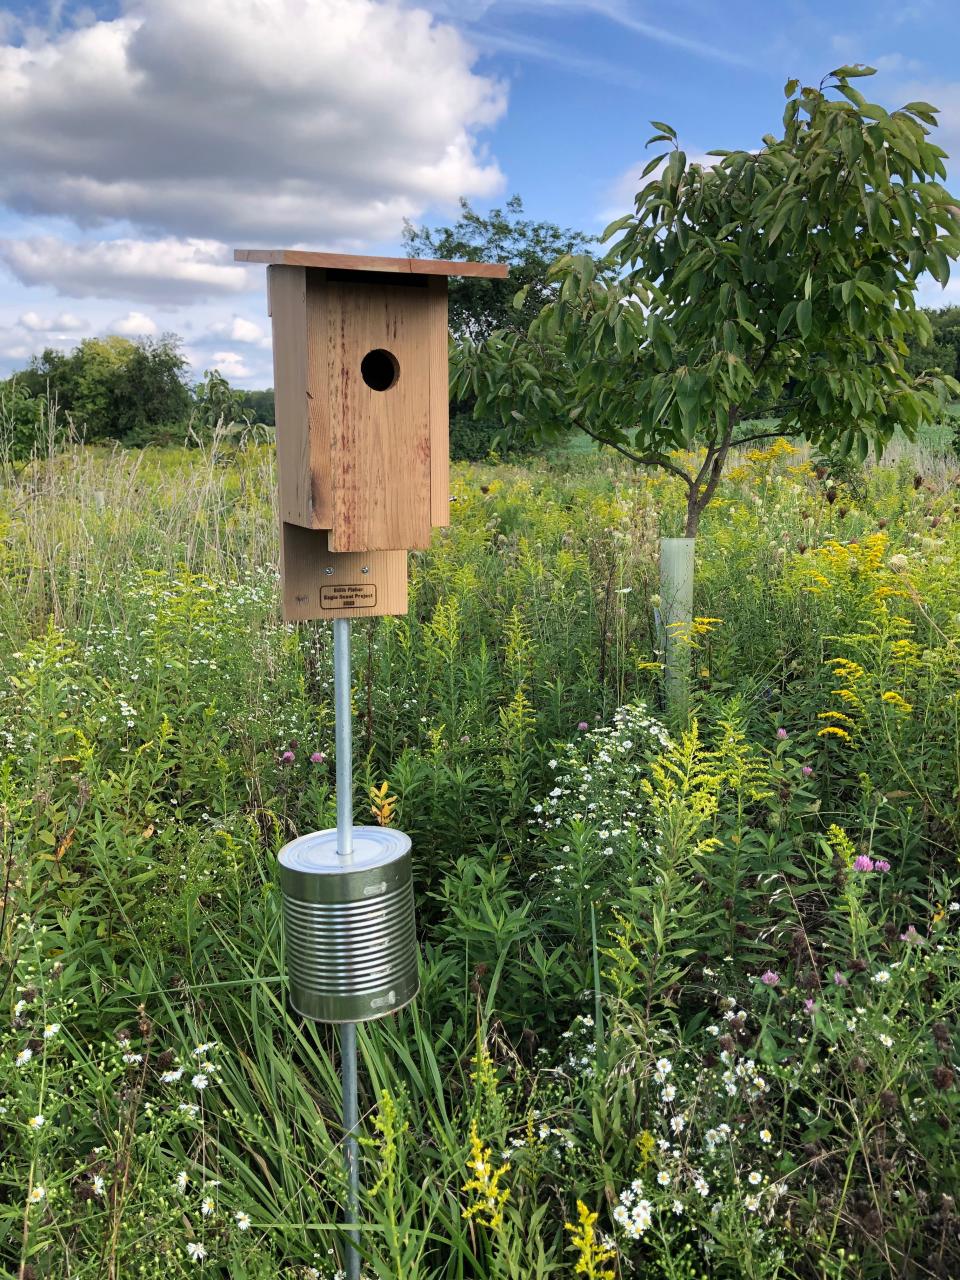 A complete Bluebird Nesting Box installed at The Land Lab at Granville Intermediate School. The box was made by Granville High School junior Edi Fisher as part of her Eagle Scout project.